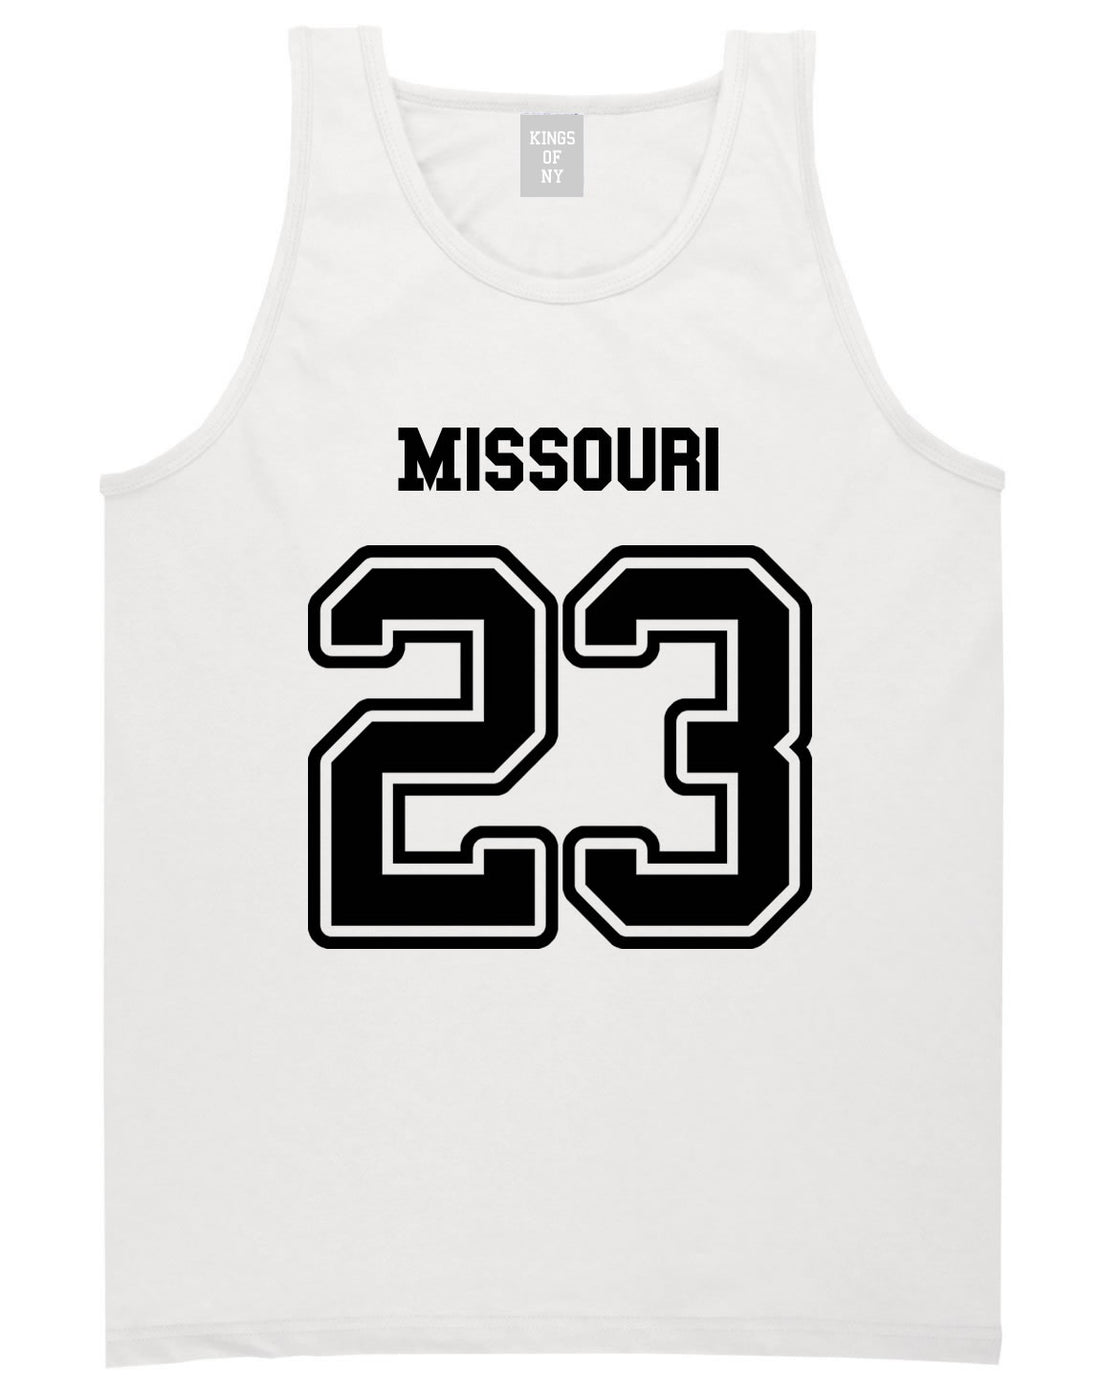 Sport Style Missouri 23 Team State Jersey Mens Tank Top By Kings Of NY